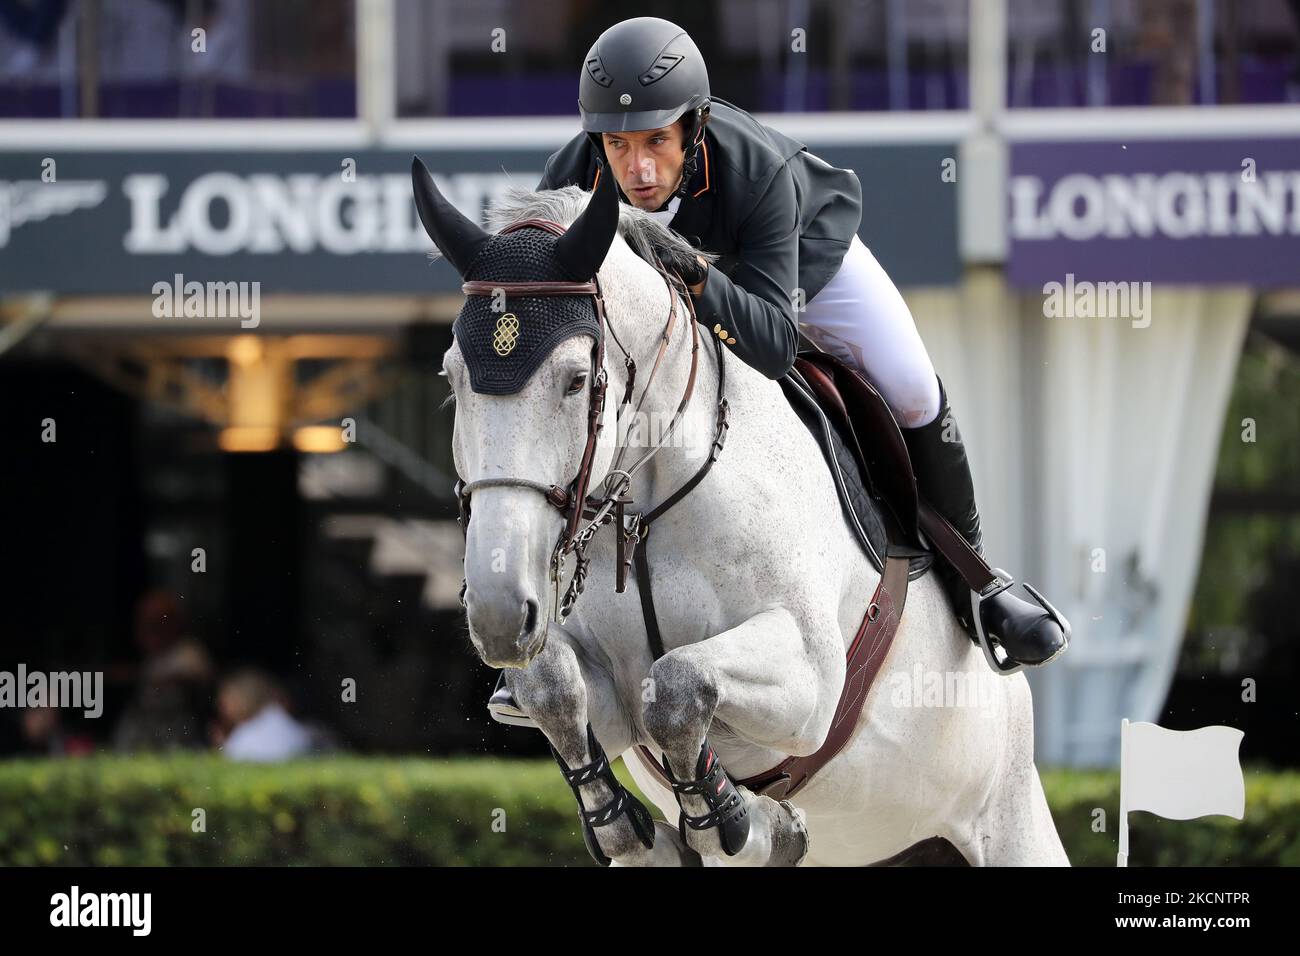 Eduardo Alvarez Aznar riding Ilero during the Copa Negrita, corresponding to the 109th edition of the Longines FEI Jumping Nations Cup Jumping Final, held at the Polo Club on 01st October 2021, in Barcelona, Spain. (Photo by Joan Valls/Urbanandsport/NurPhoto) Stock Photo